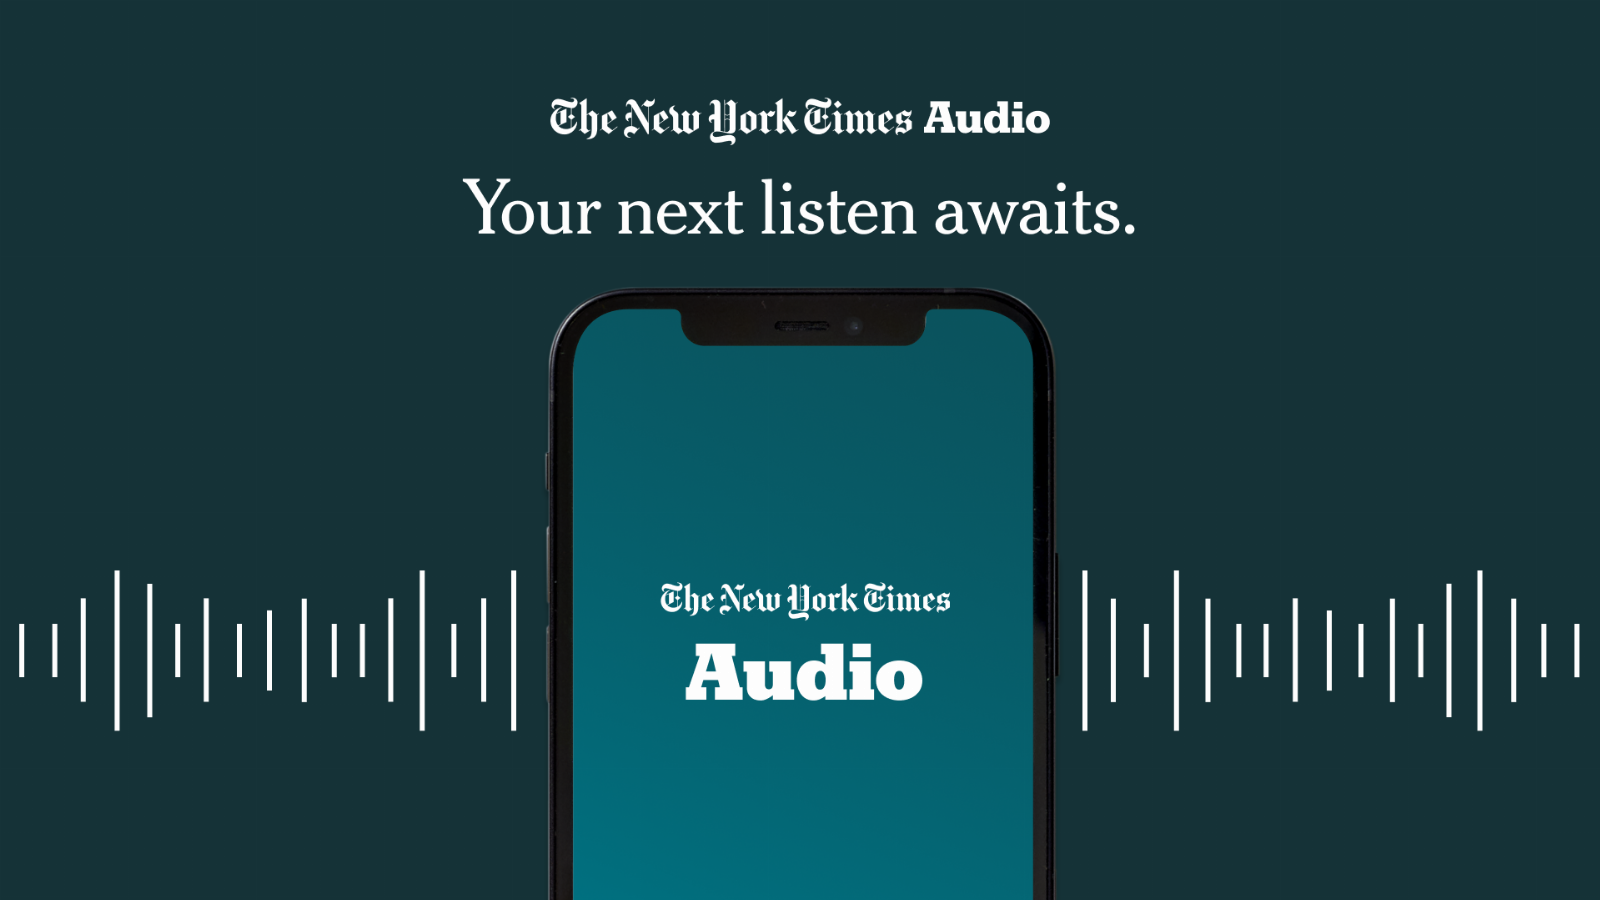 Years after its Audm acquisition, The New York Times launches its own audio app